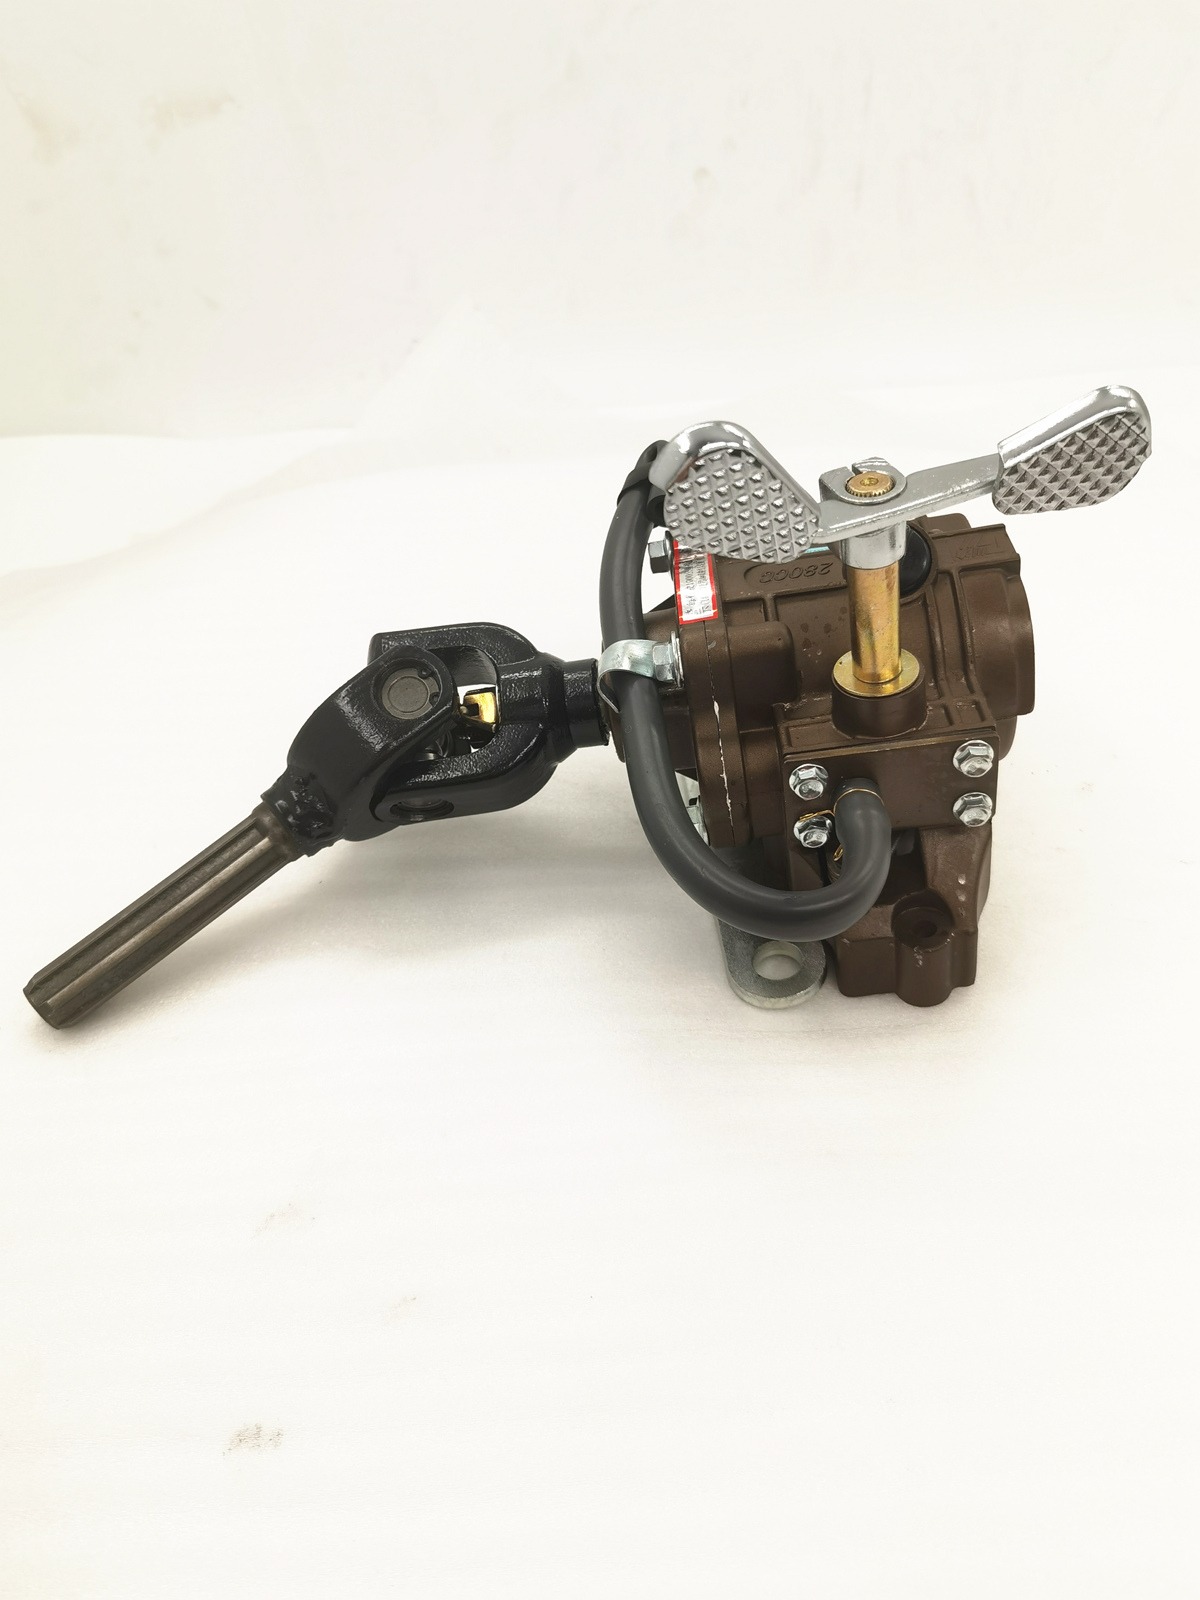 DAYANG Chuanyu 280 reverse gear box for Engine Motor Trike 3 Wheel Motorcycle Tricycle with big size base plate